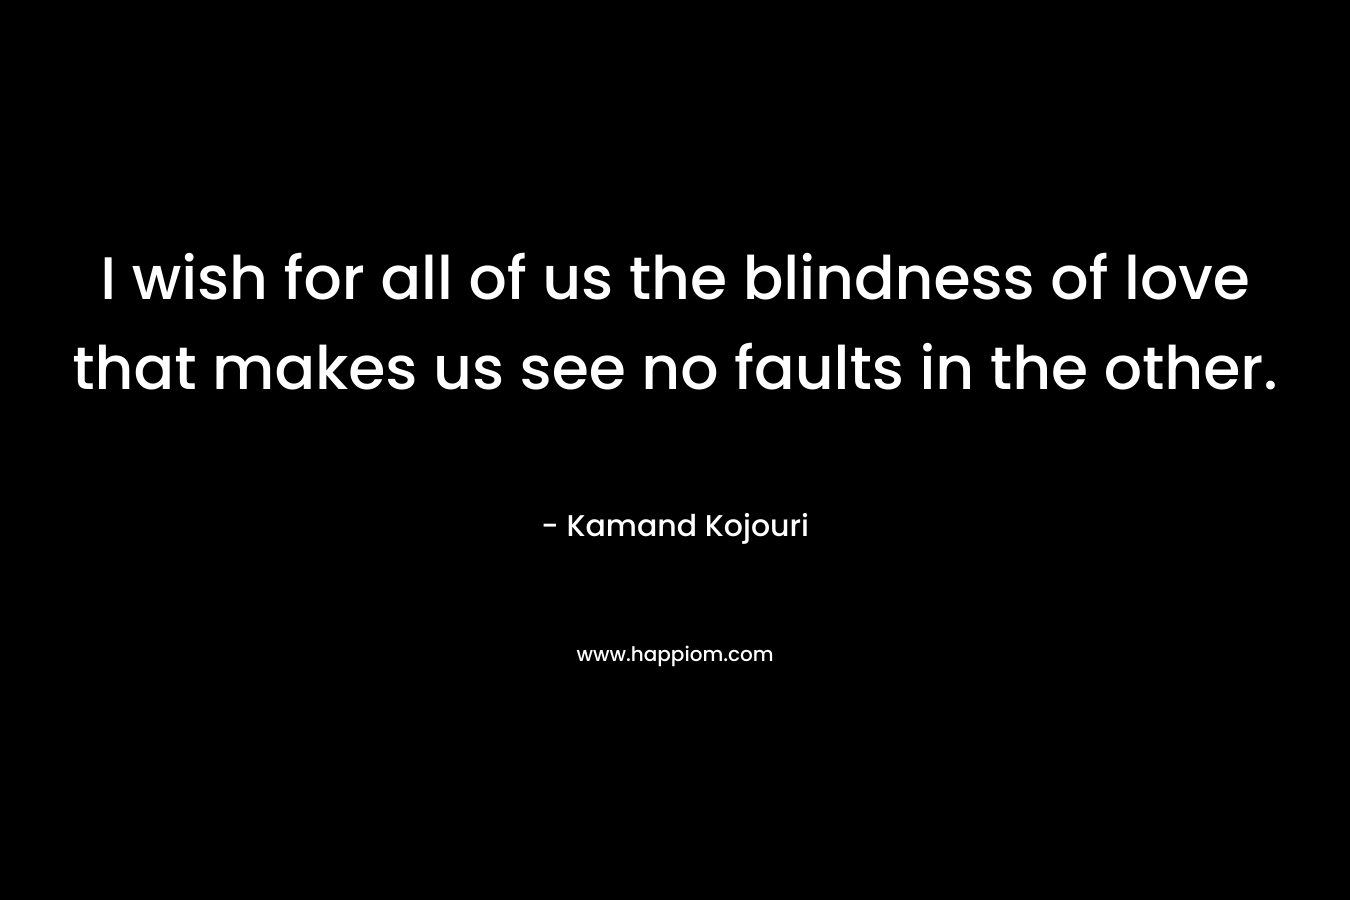 I wish for all of us the blindness of love that makes us see no faults in the other. – Kamand Kojouri